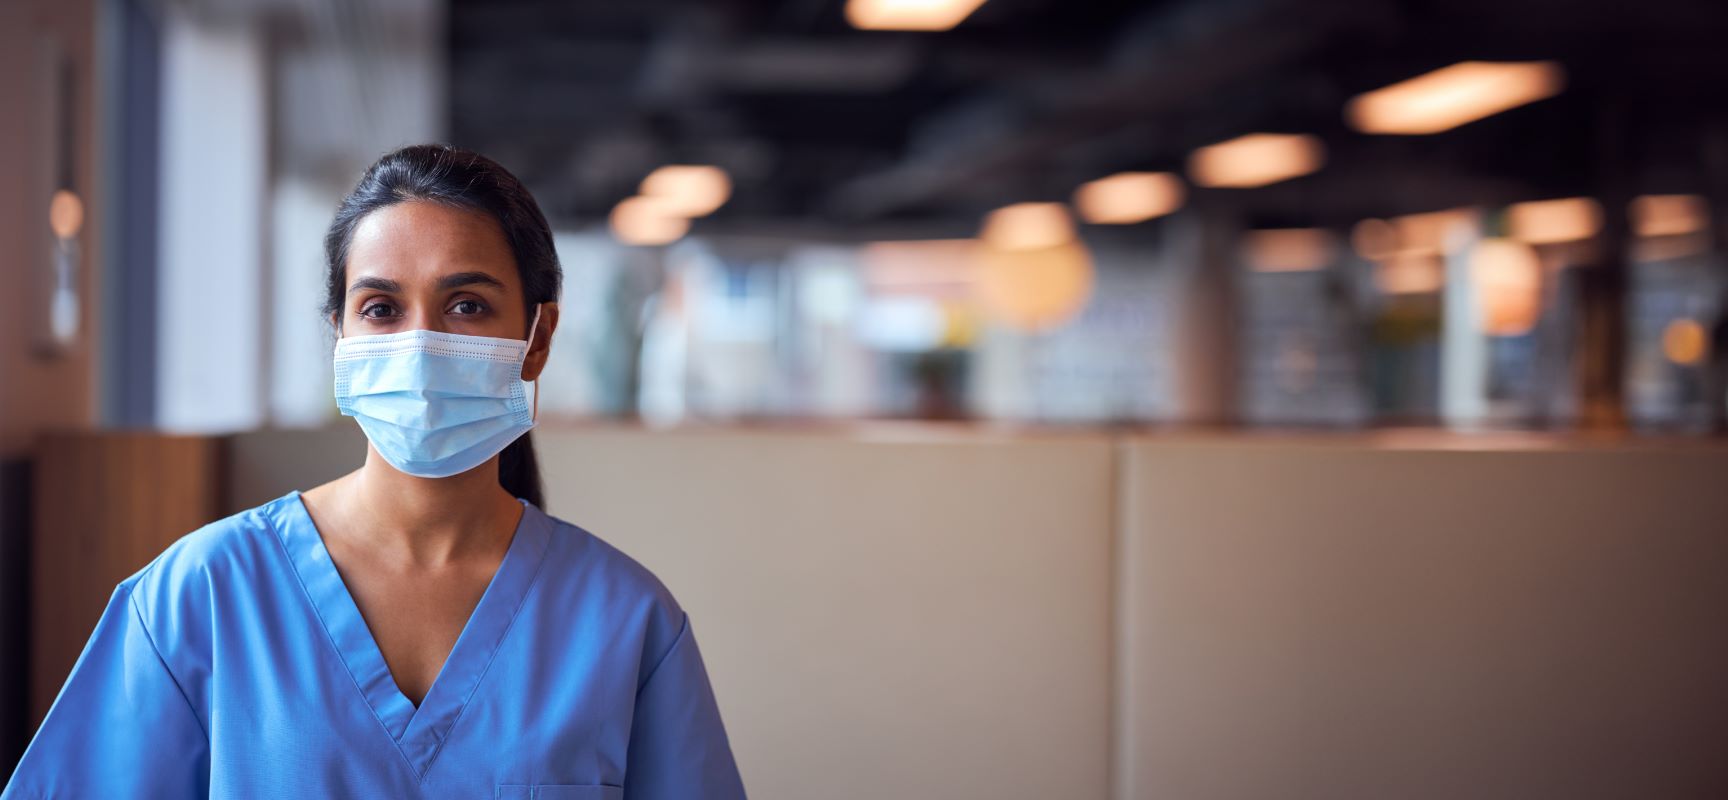 Medical professional in scrubs wearing a mask